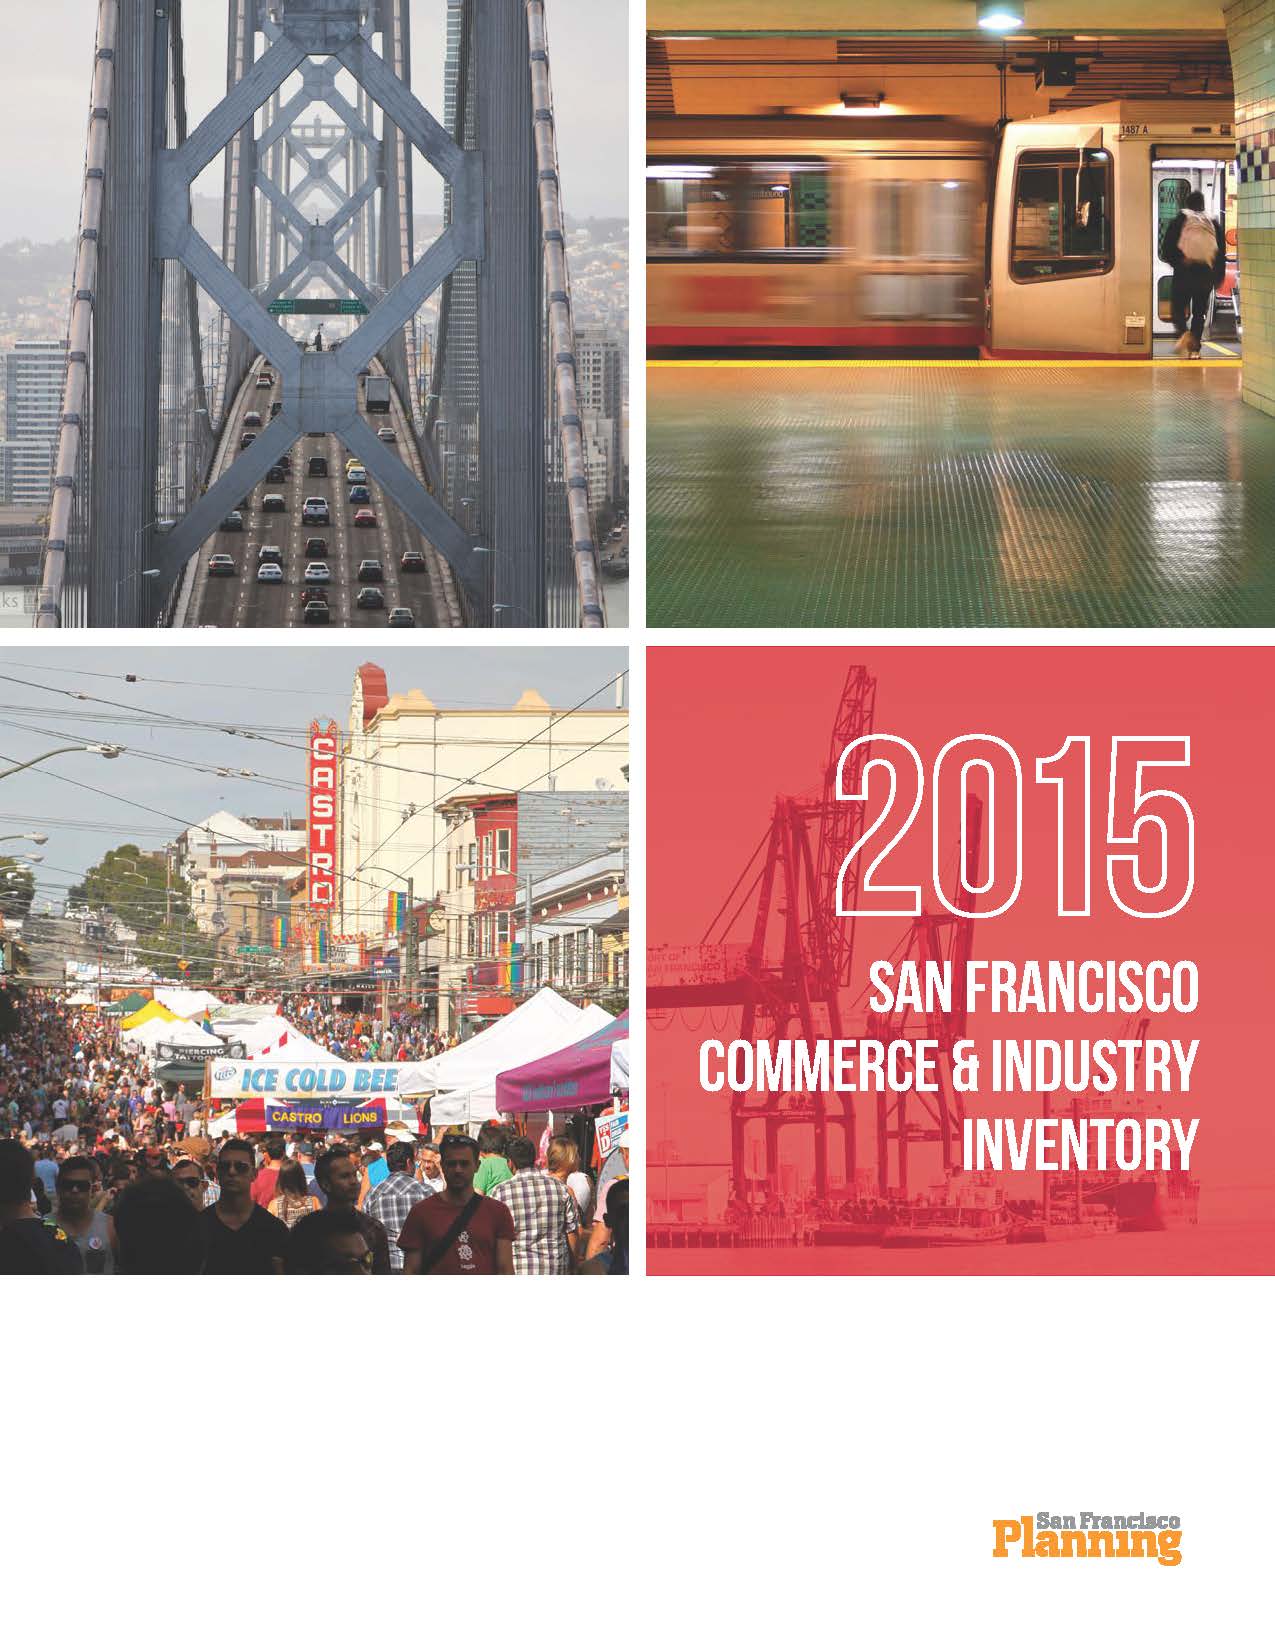 Cover Image for the 2015 Commerce & Industry Inventory Report